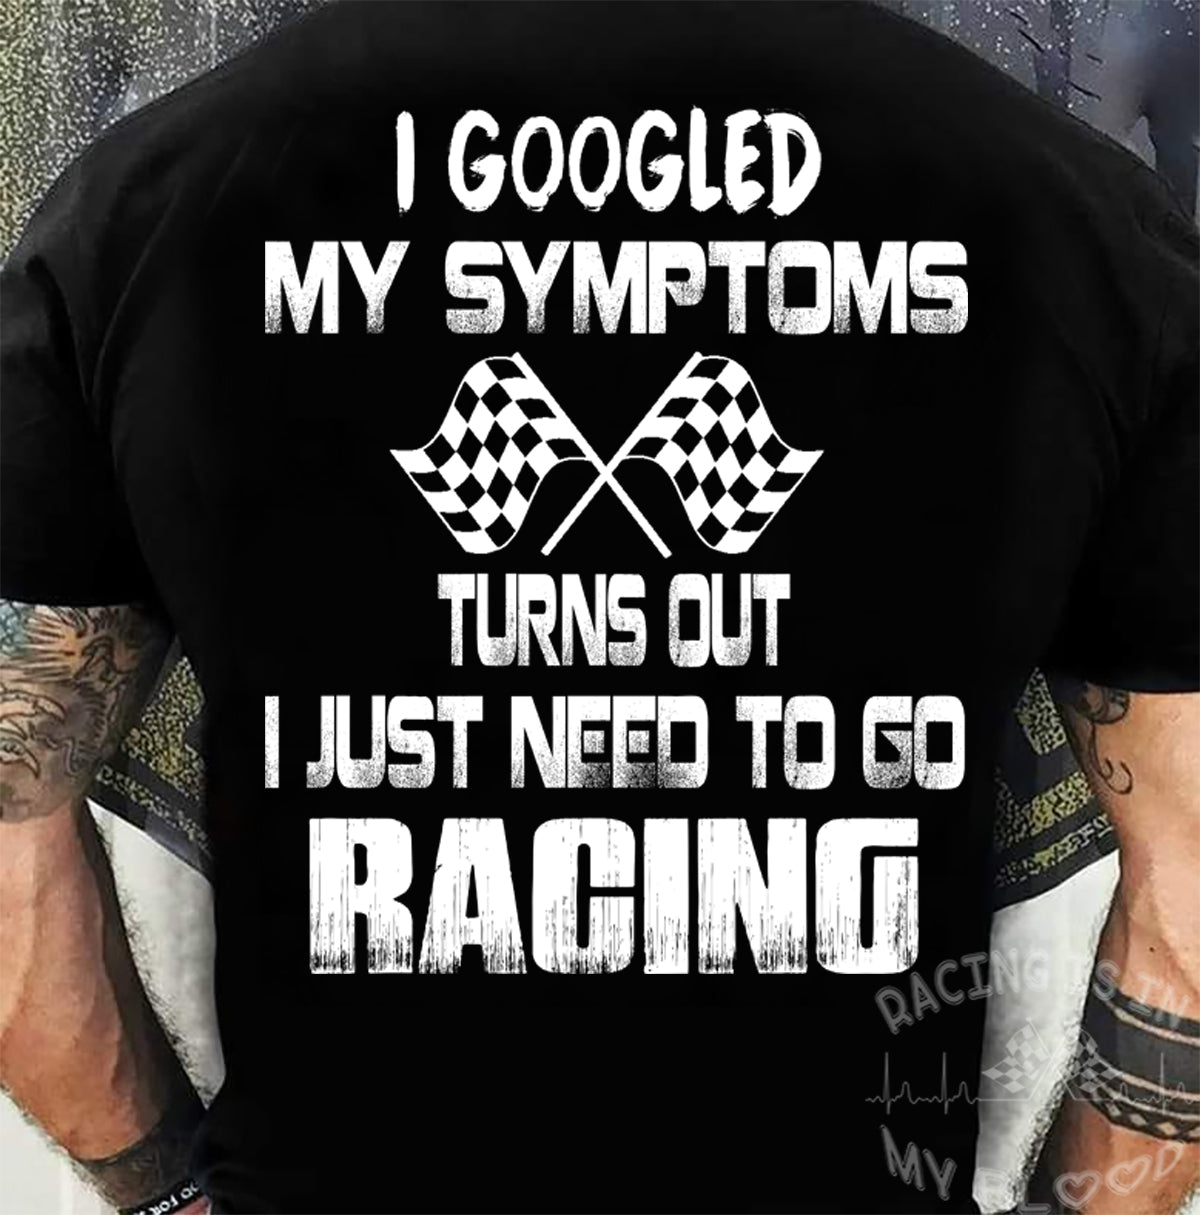 I Googled My Symptoms Turns Out I Just Need To Go Racing T-Shirts!